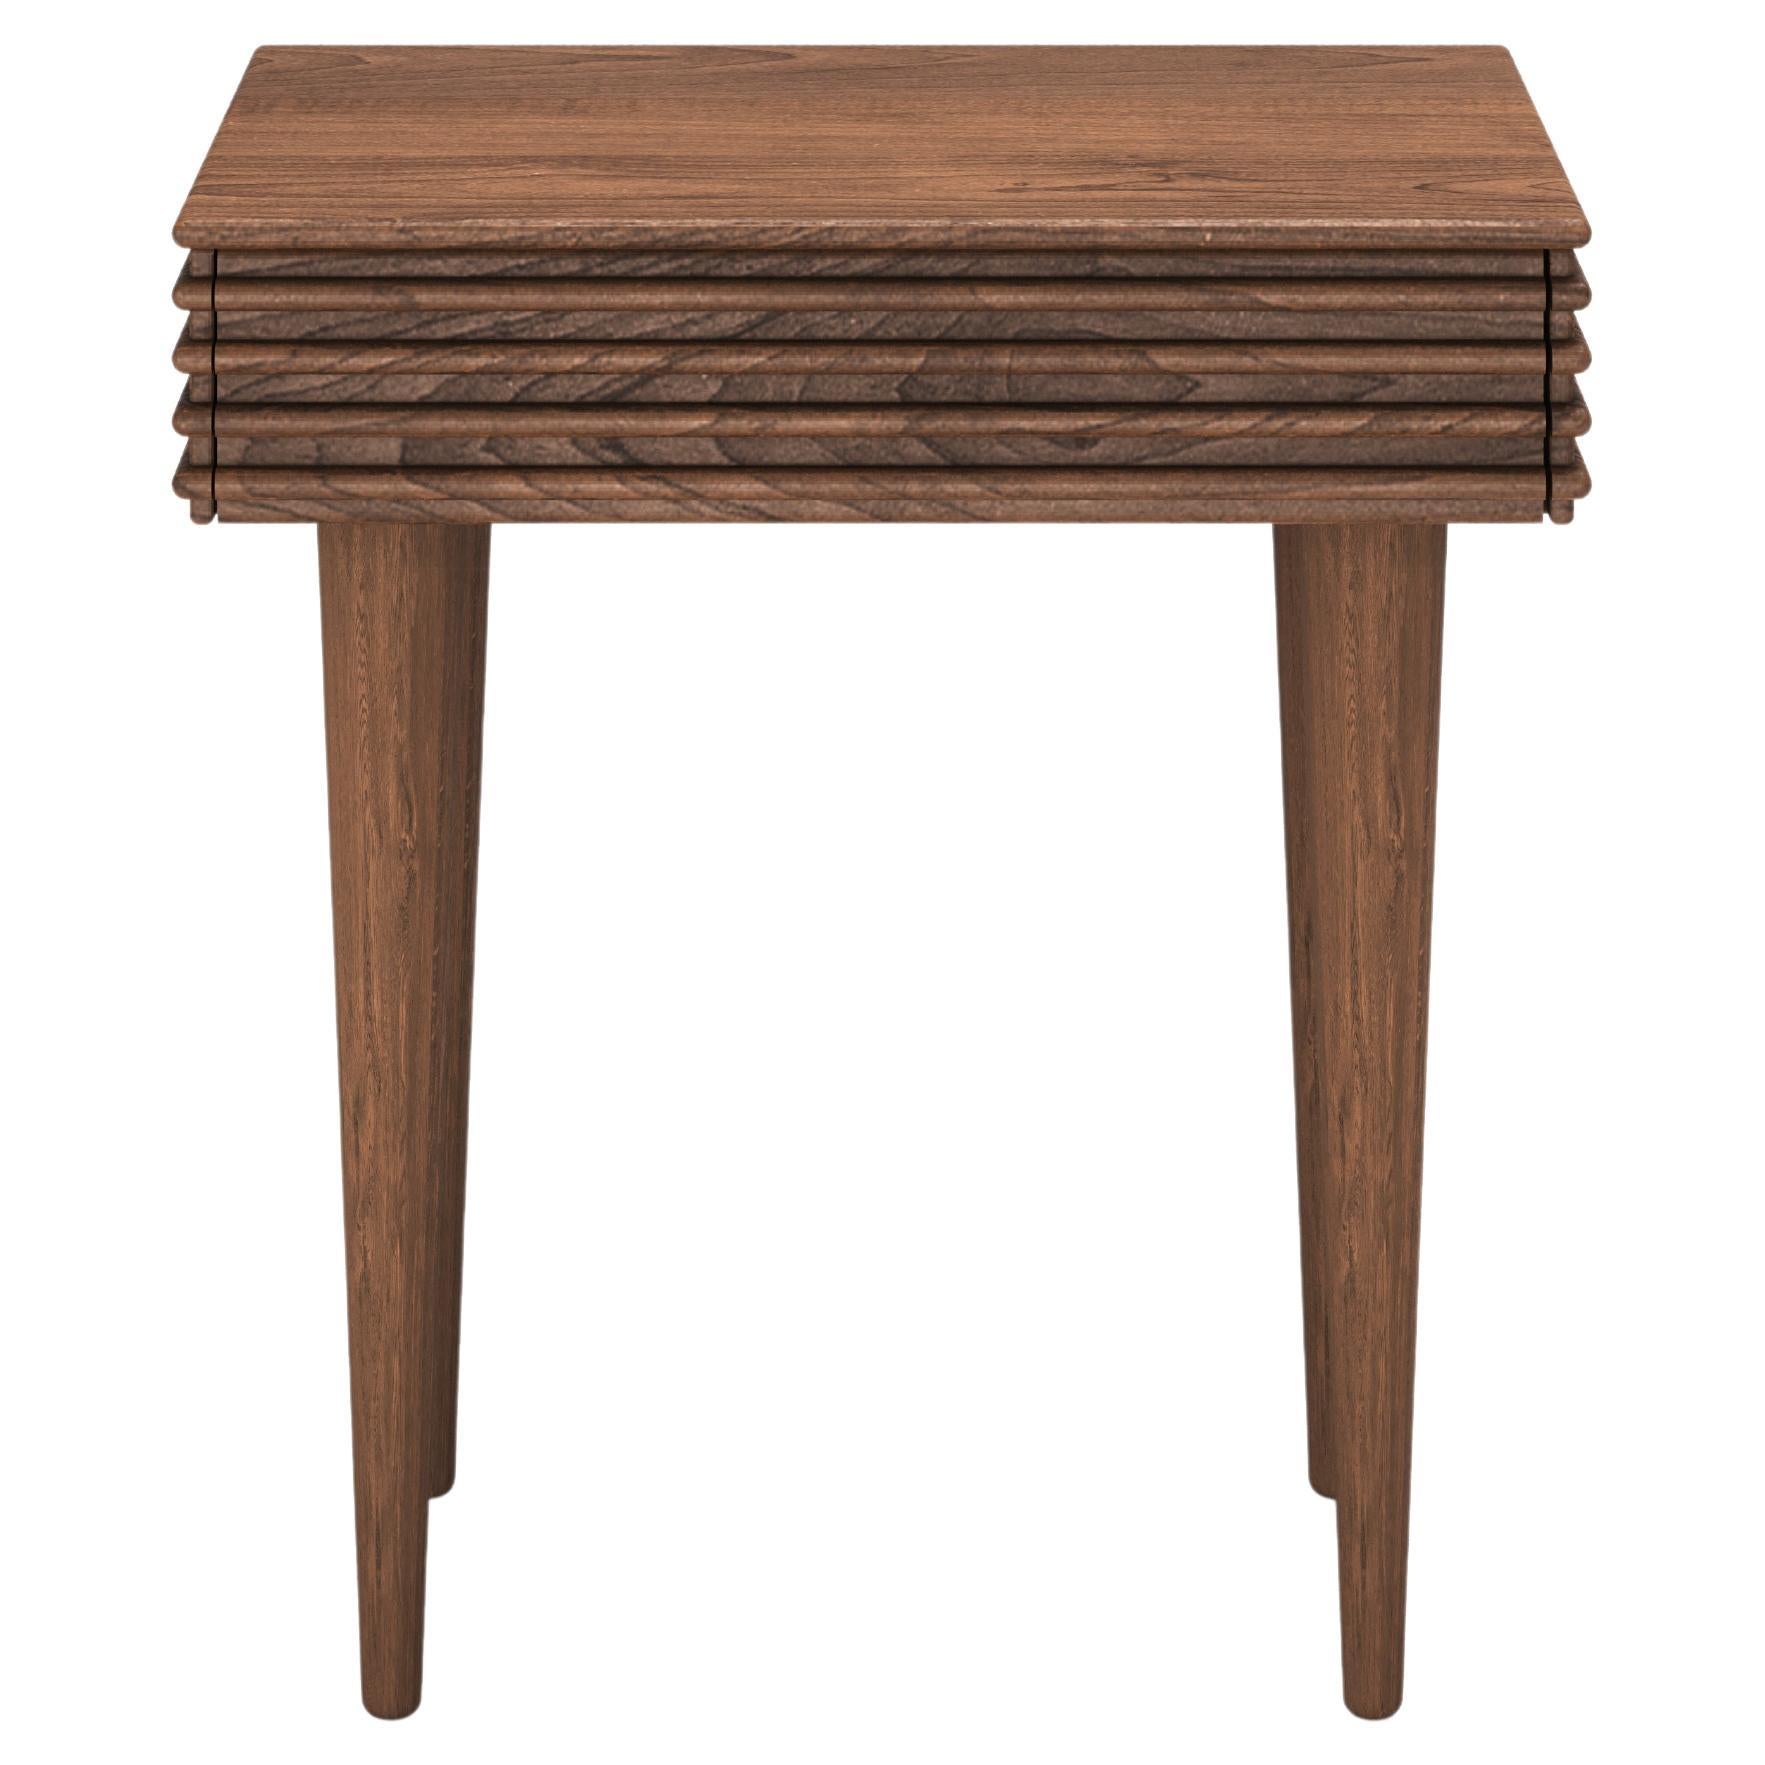 Contemporary Night Table 'Groove' by DK3, Walnut, S 35 cm, More Wood Finishes